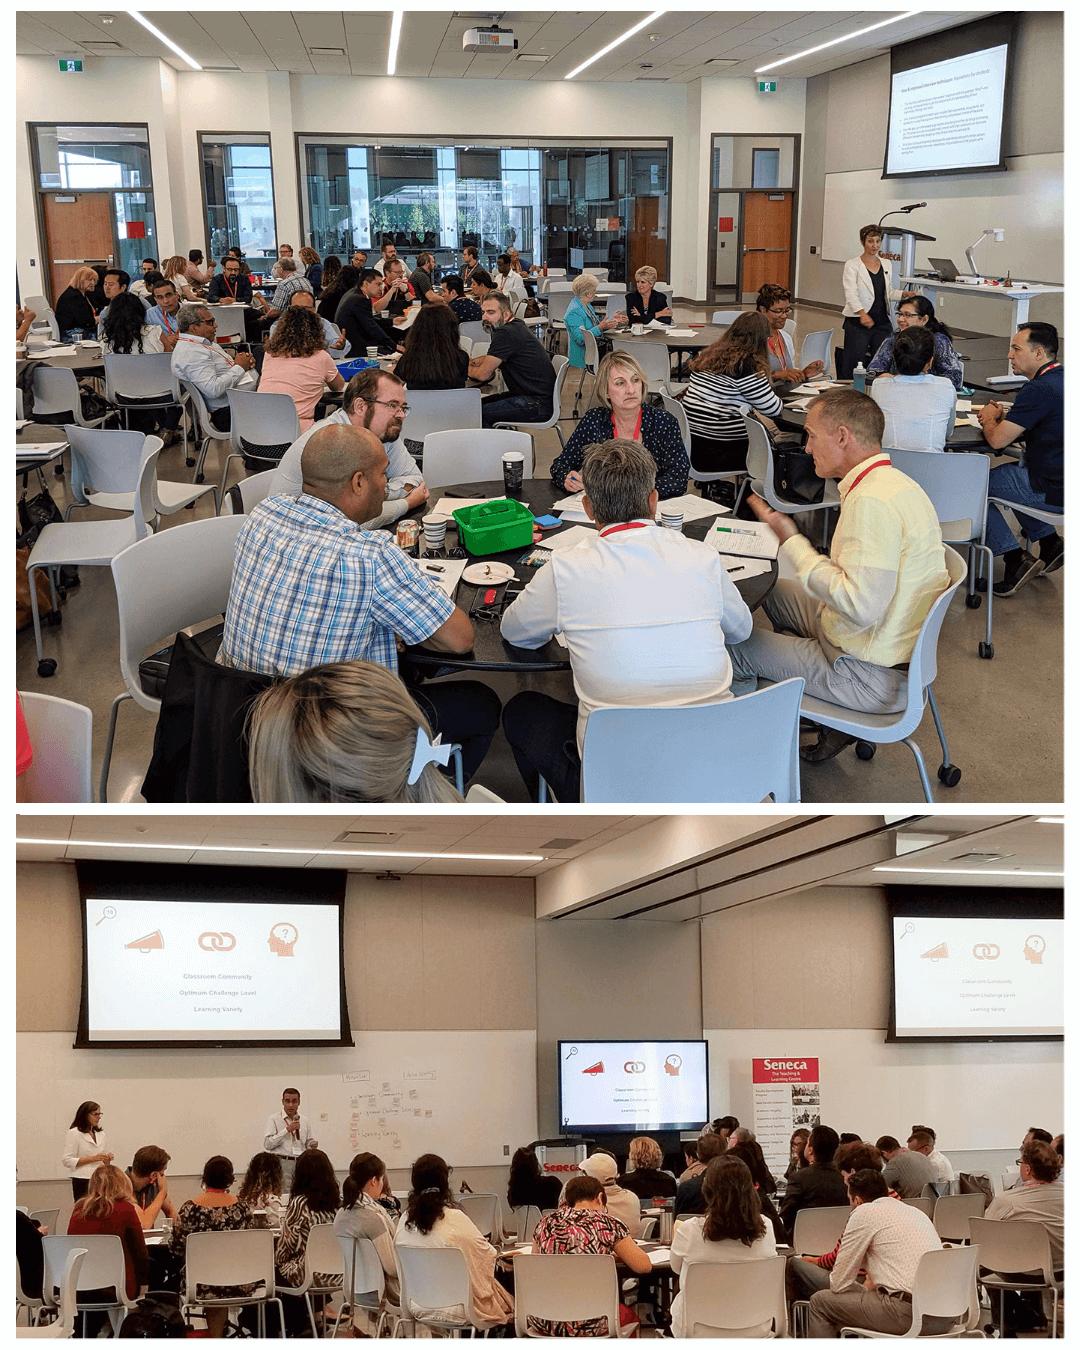 A collage of two images, each depicting participants at the Teaching & Learning Summer 2019 Conference